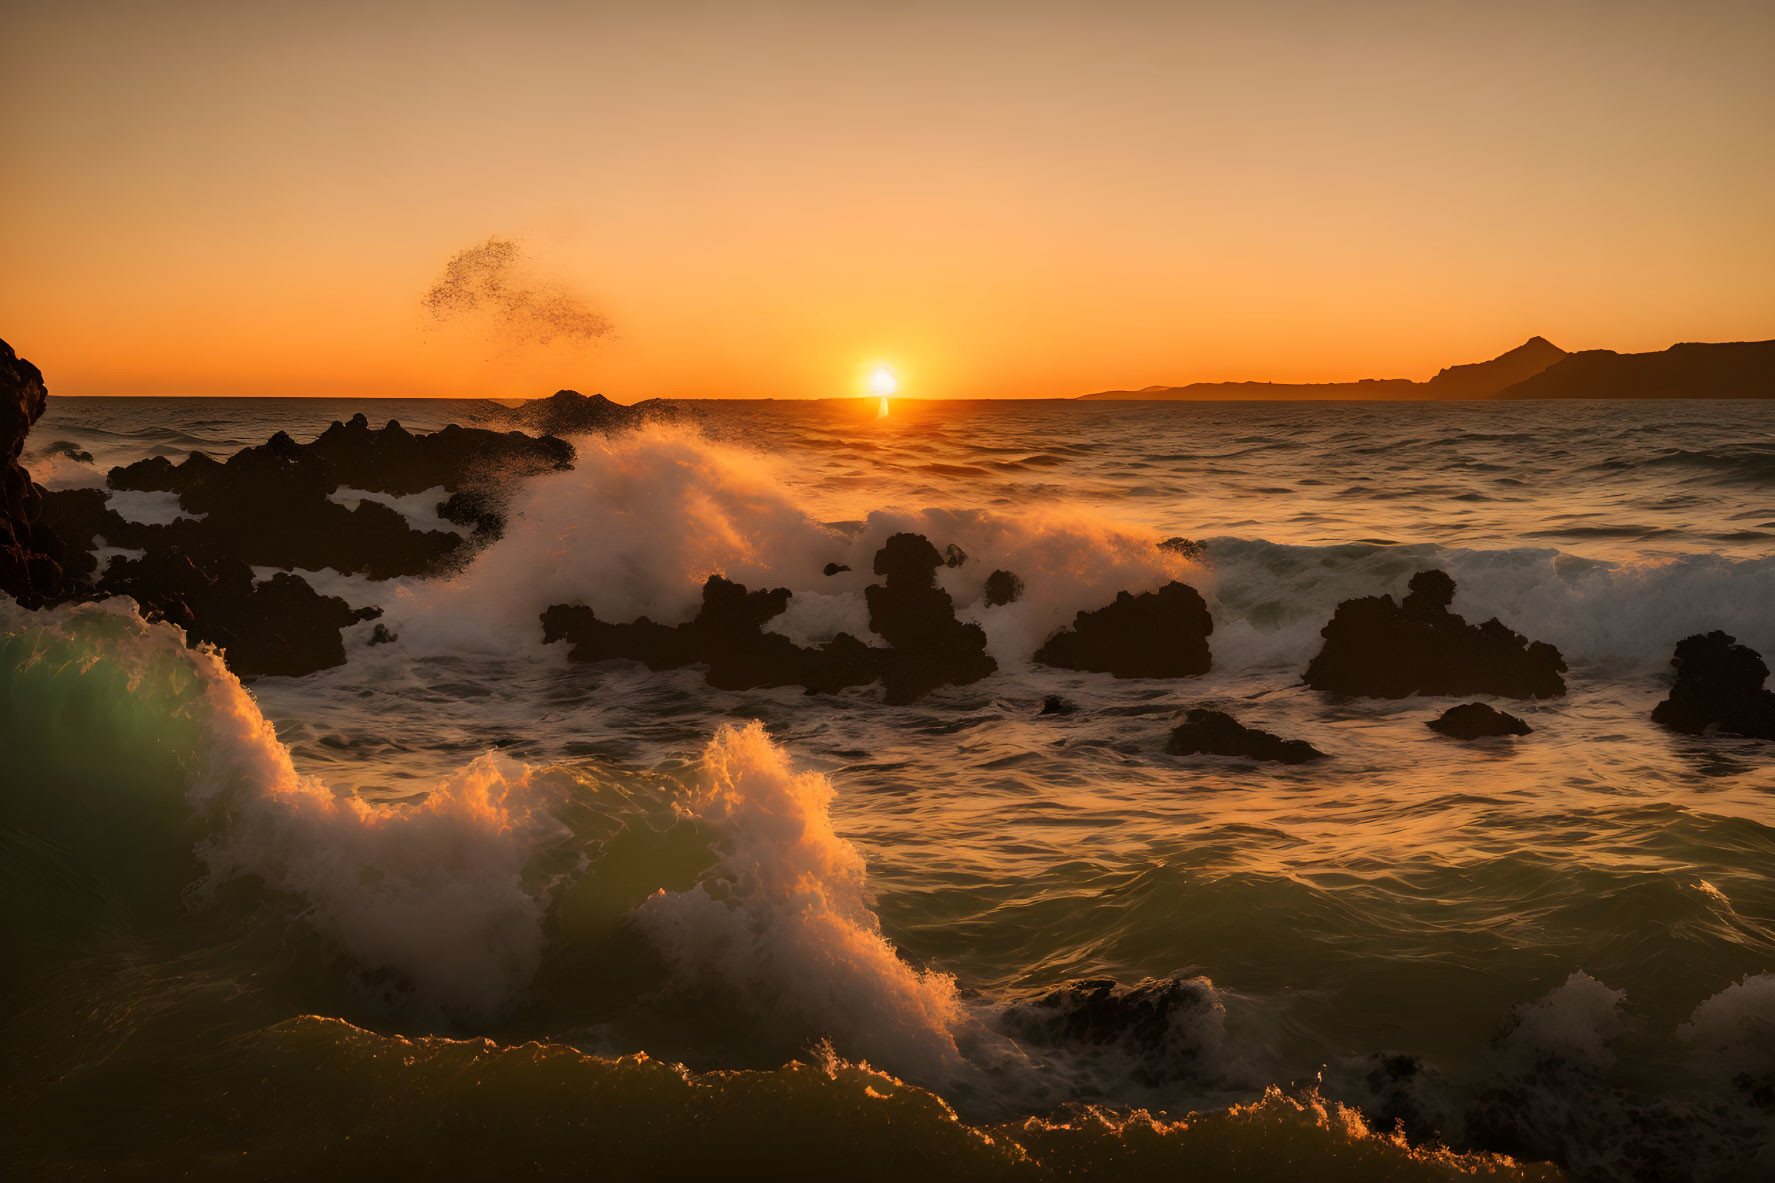 Sea waves with sunset and some volcanic rocks is a